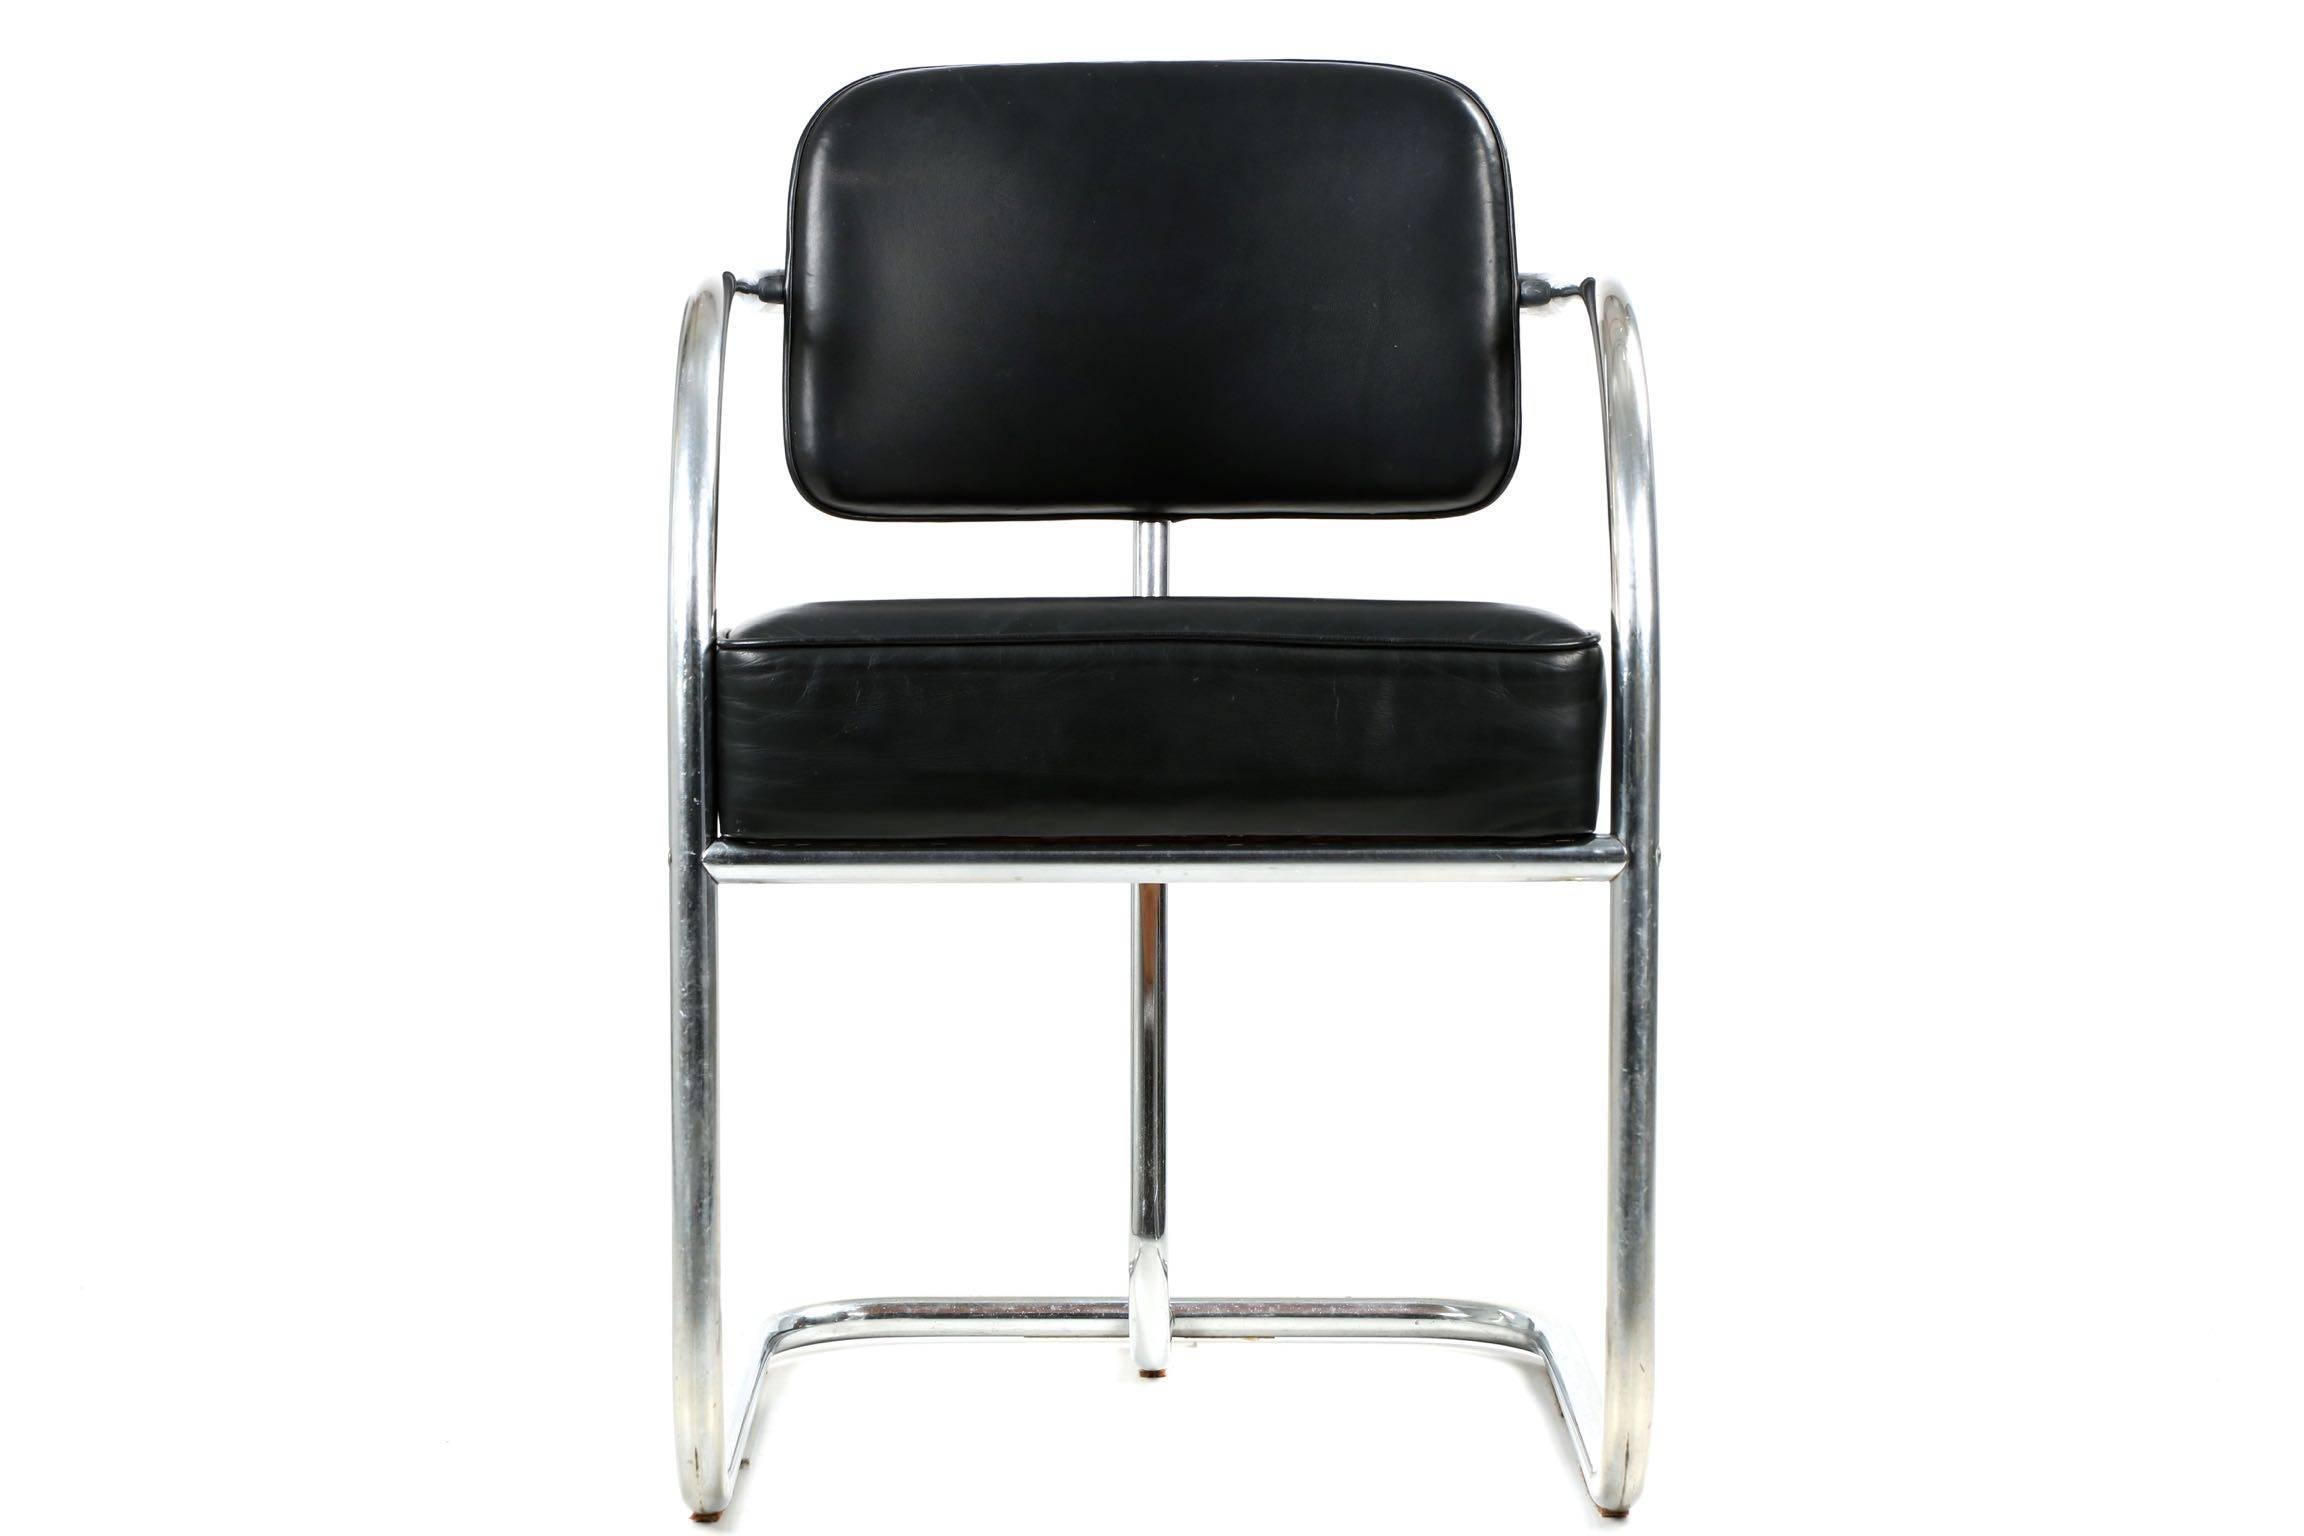 An original interpretation of the cantilever chair, this gorgeous chromed steel tubular chair is a striking display of unending curvature, the arms in the classic C-form, the back supported by an angled brace that mirrors the curvature of the front